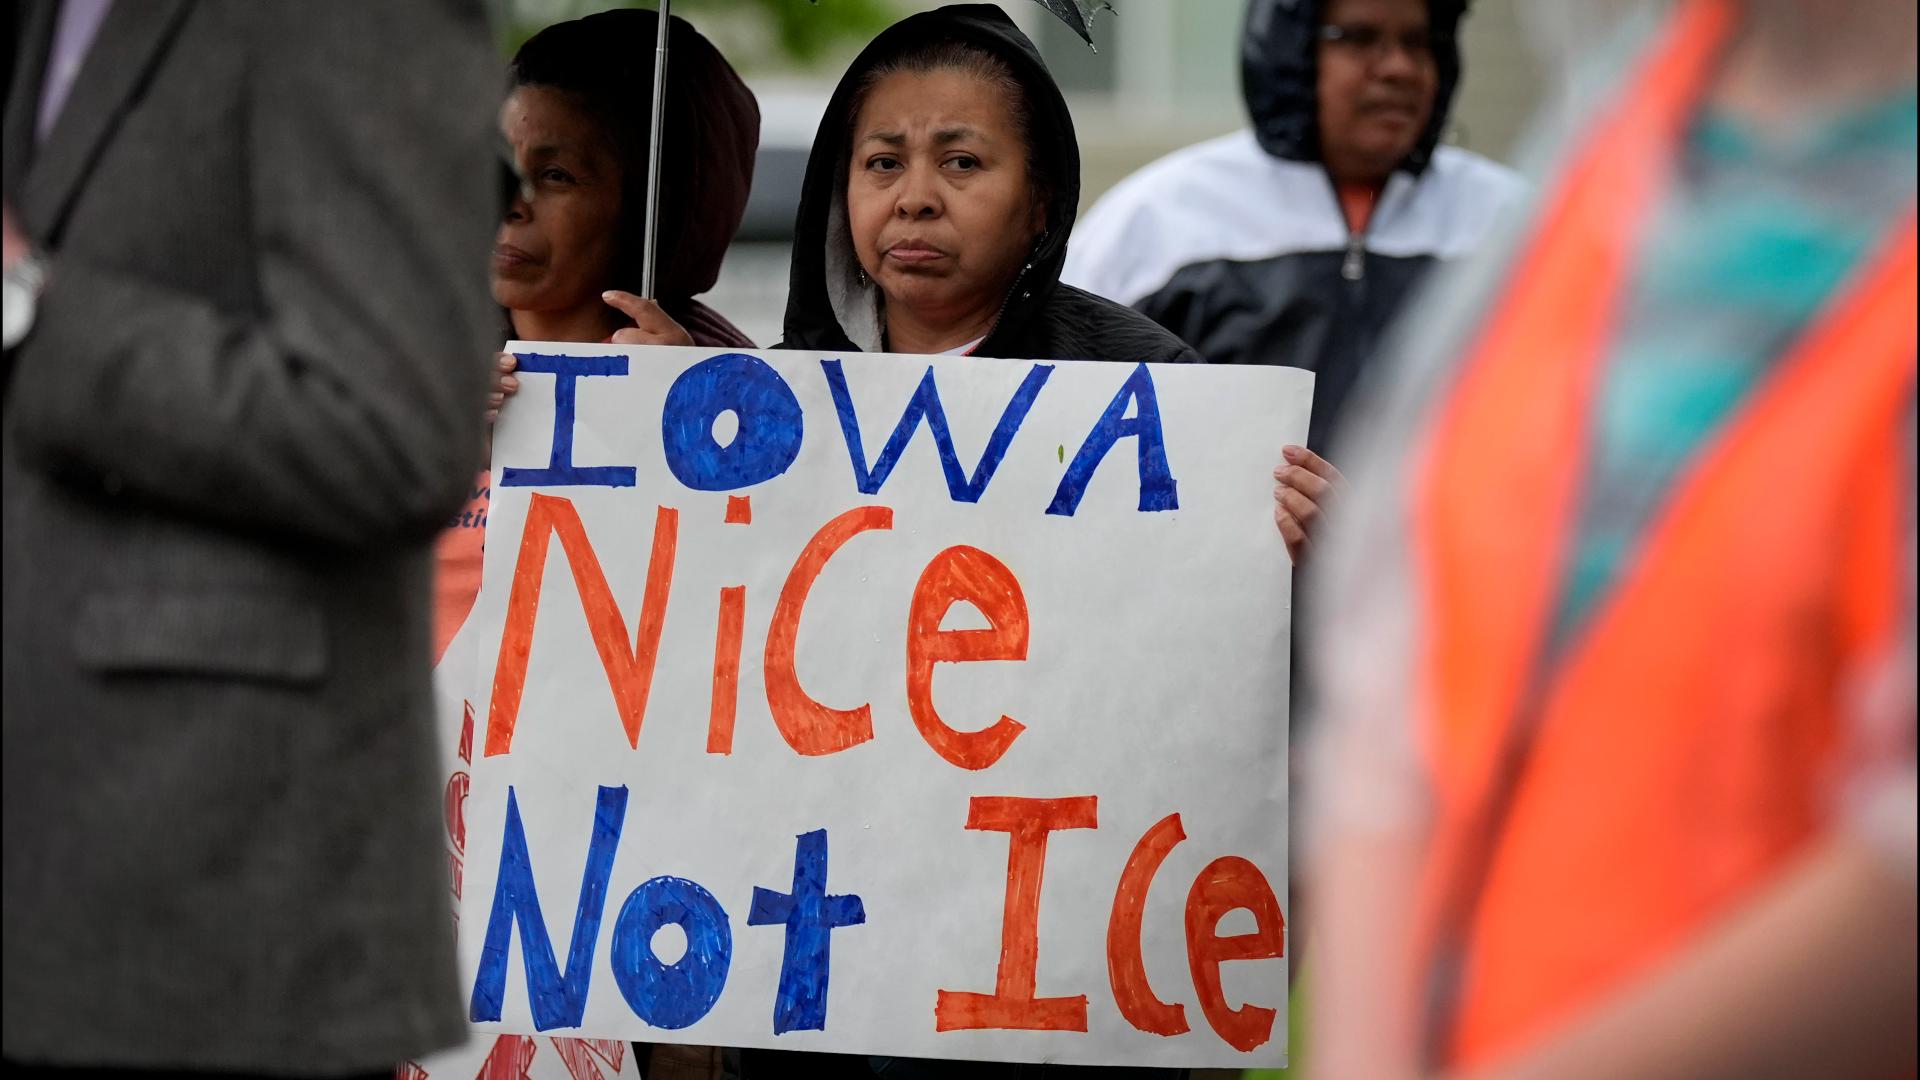 The law was scheduled to be enforceable on July 1st, and now that it is temporarily not, advocates want to send a message on the impact the immigrant community has.